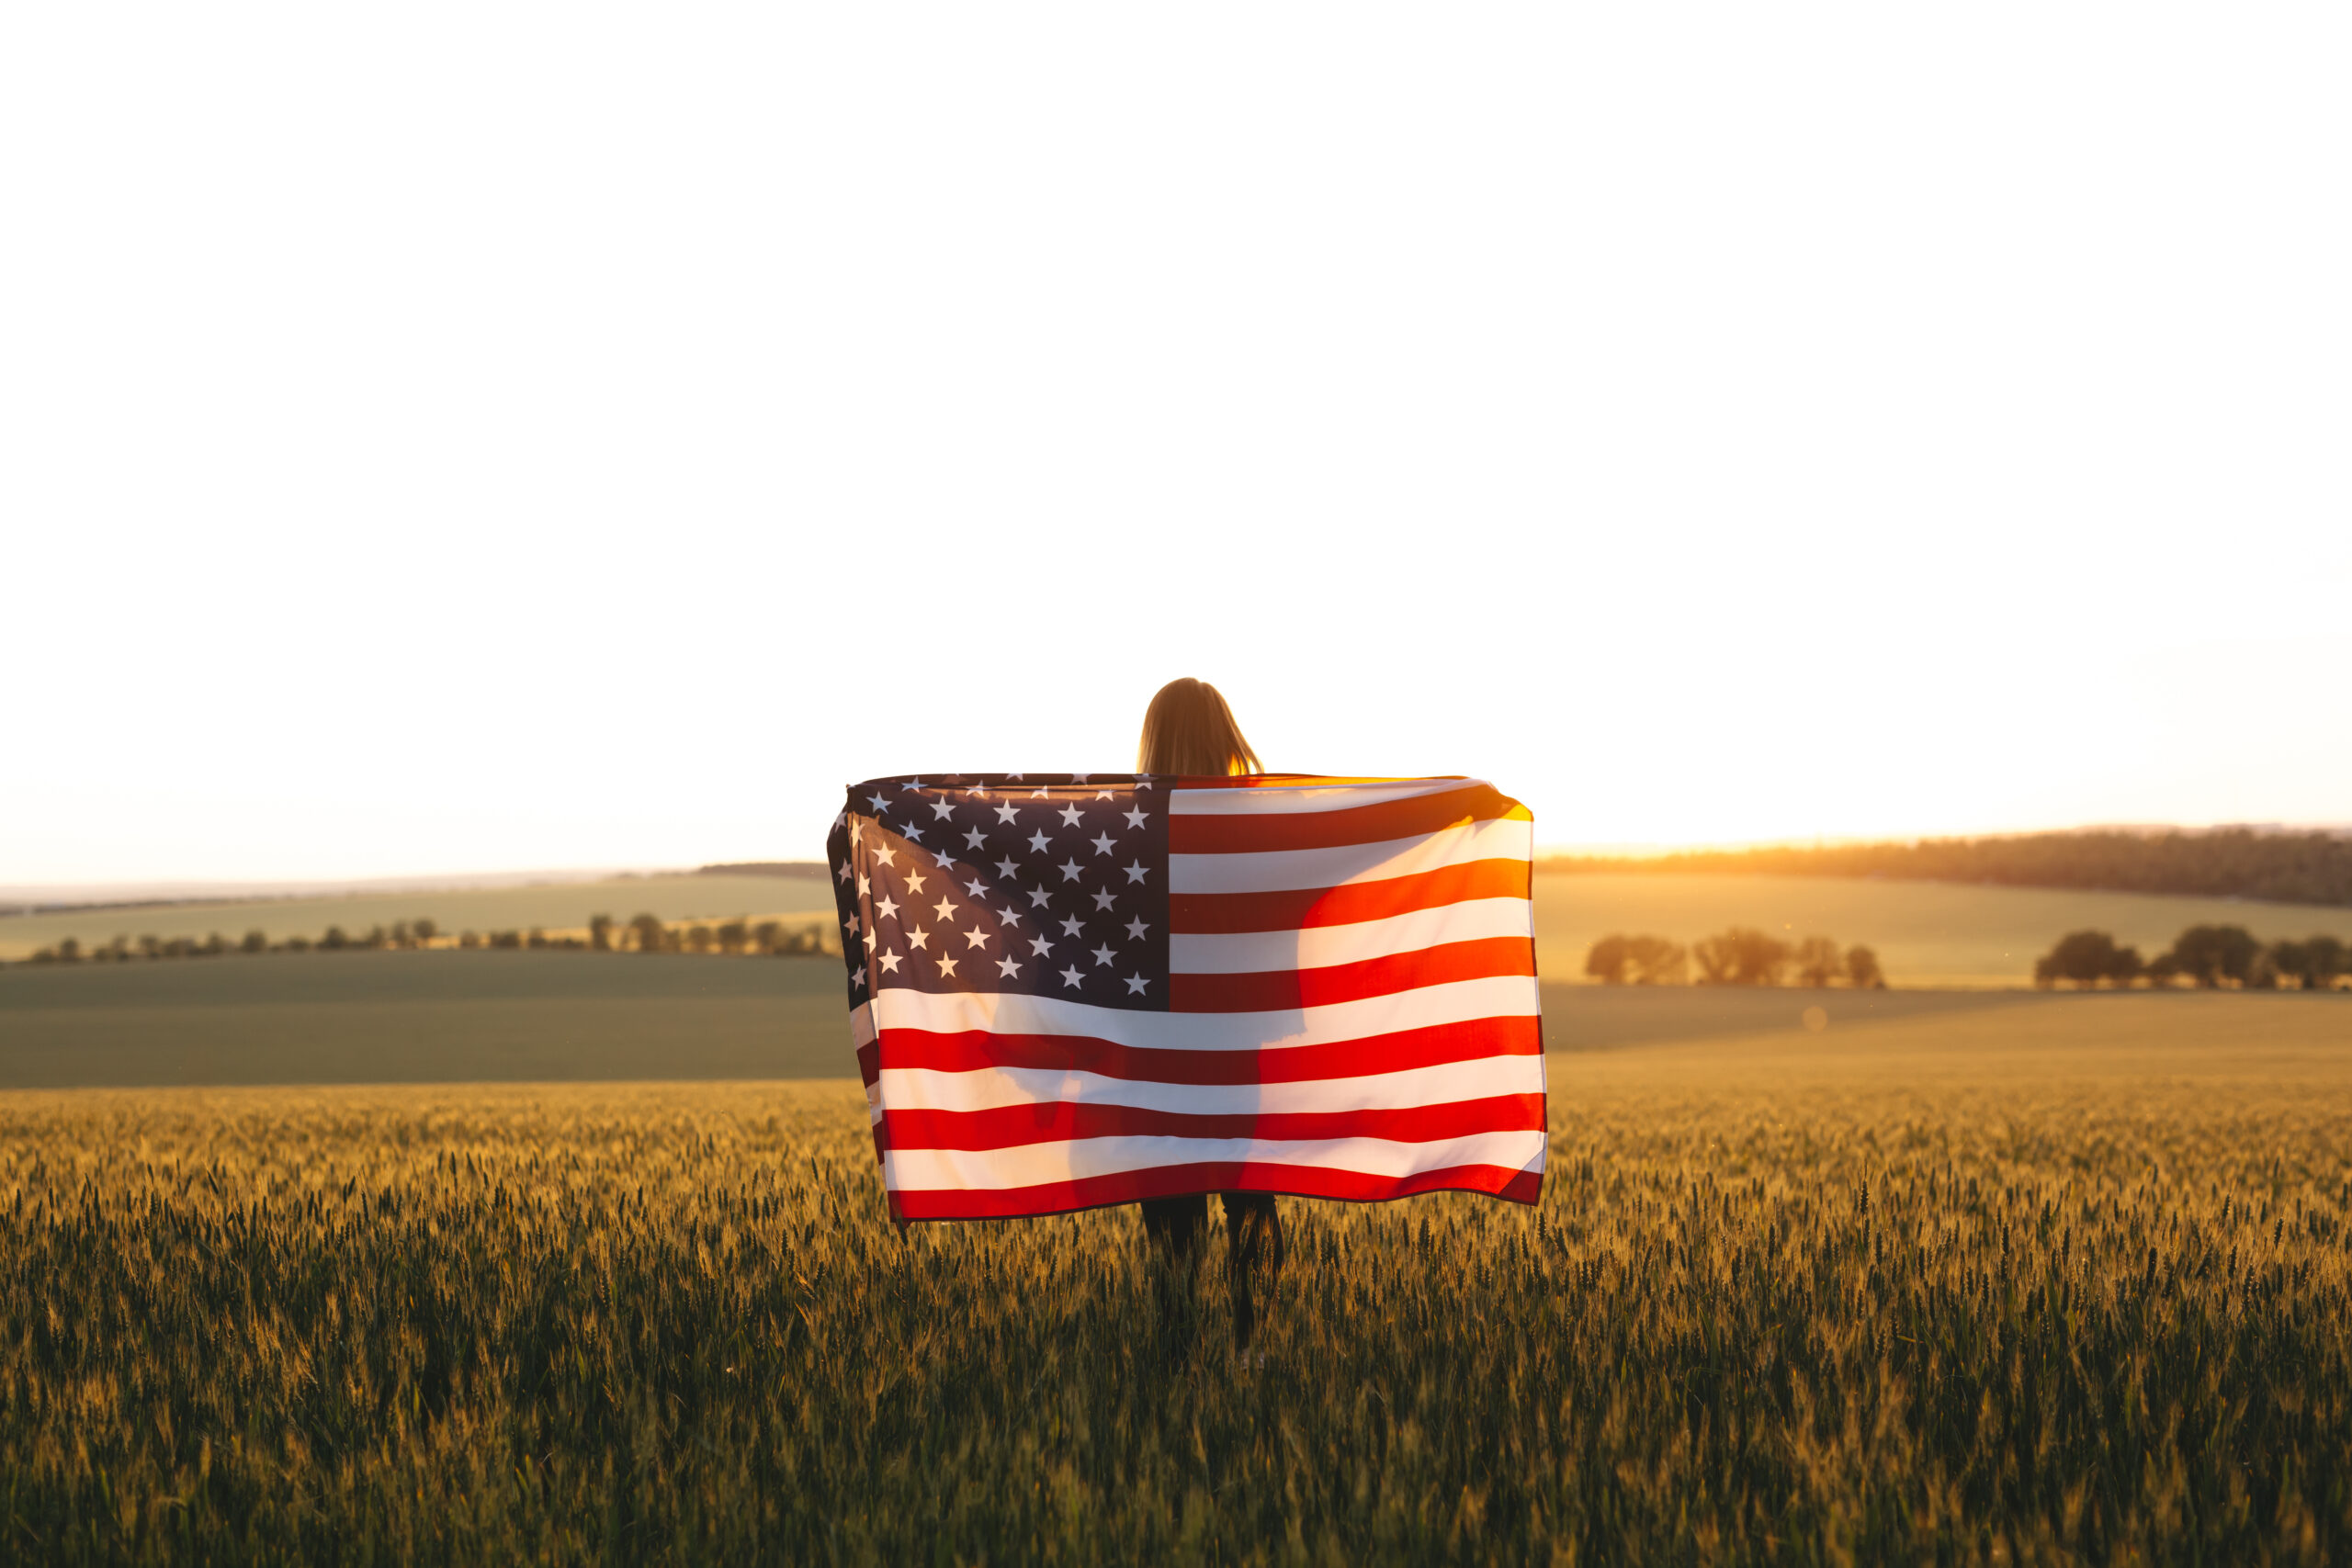 Girl with American flag in field.